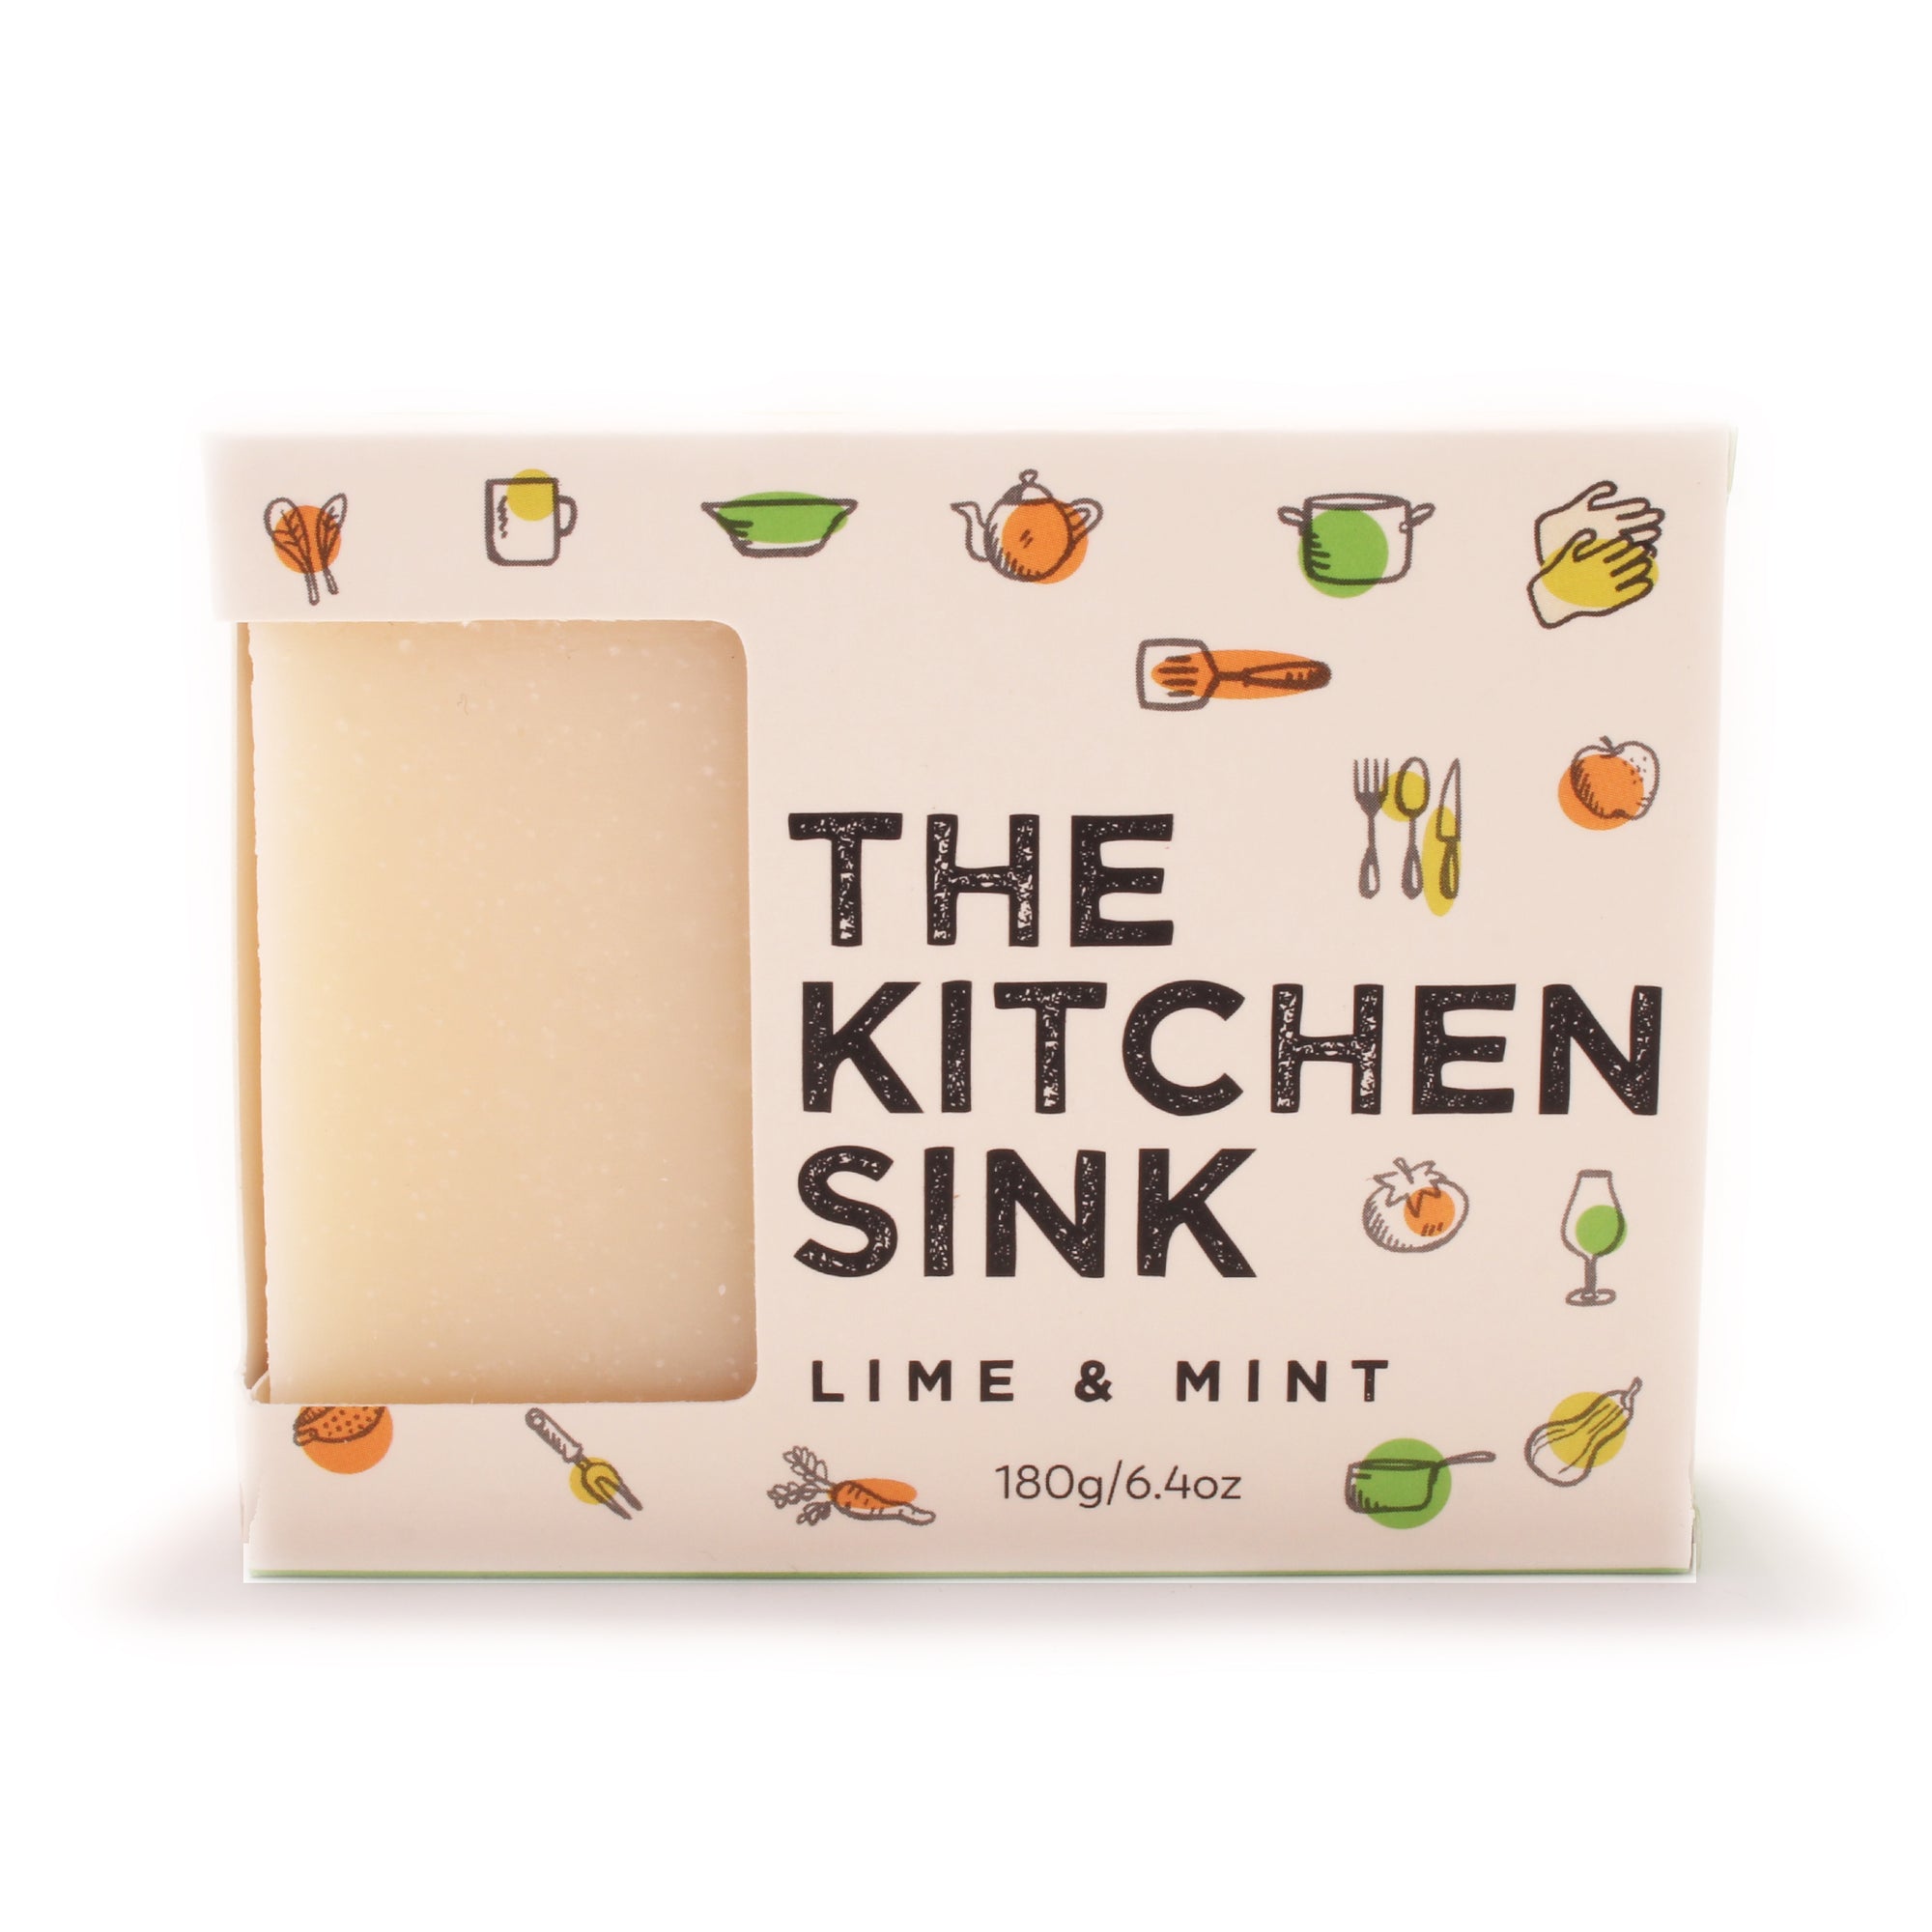 A bar of the Kitchen Sink soap bar for the kitchen in the box.